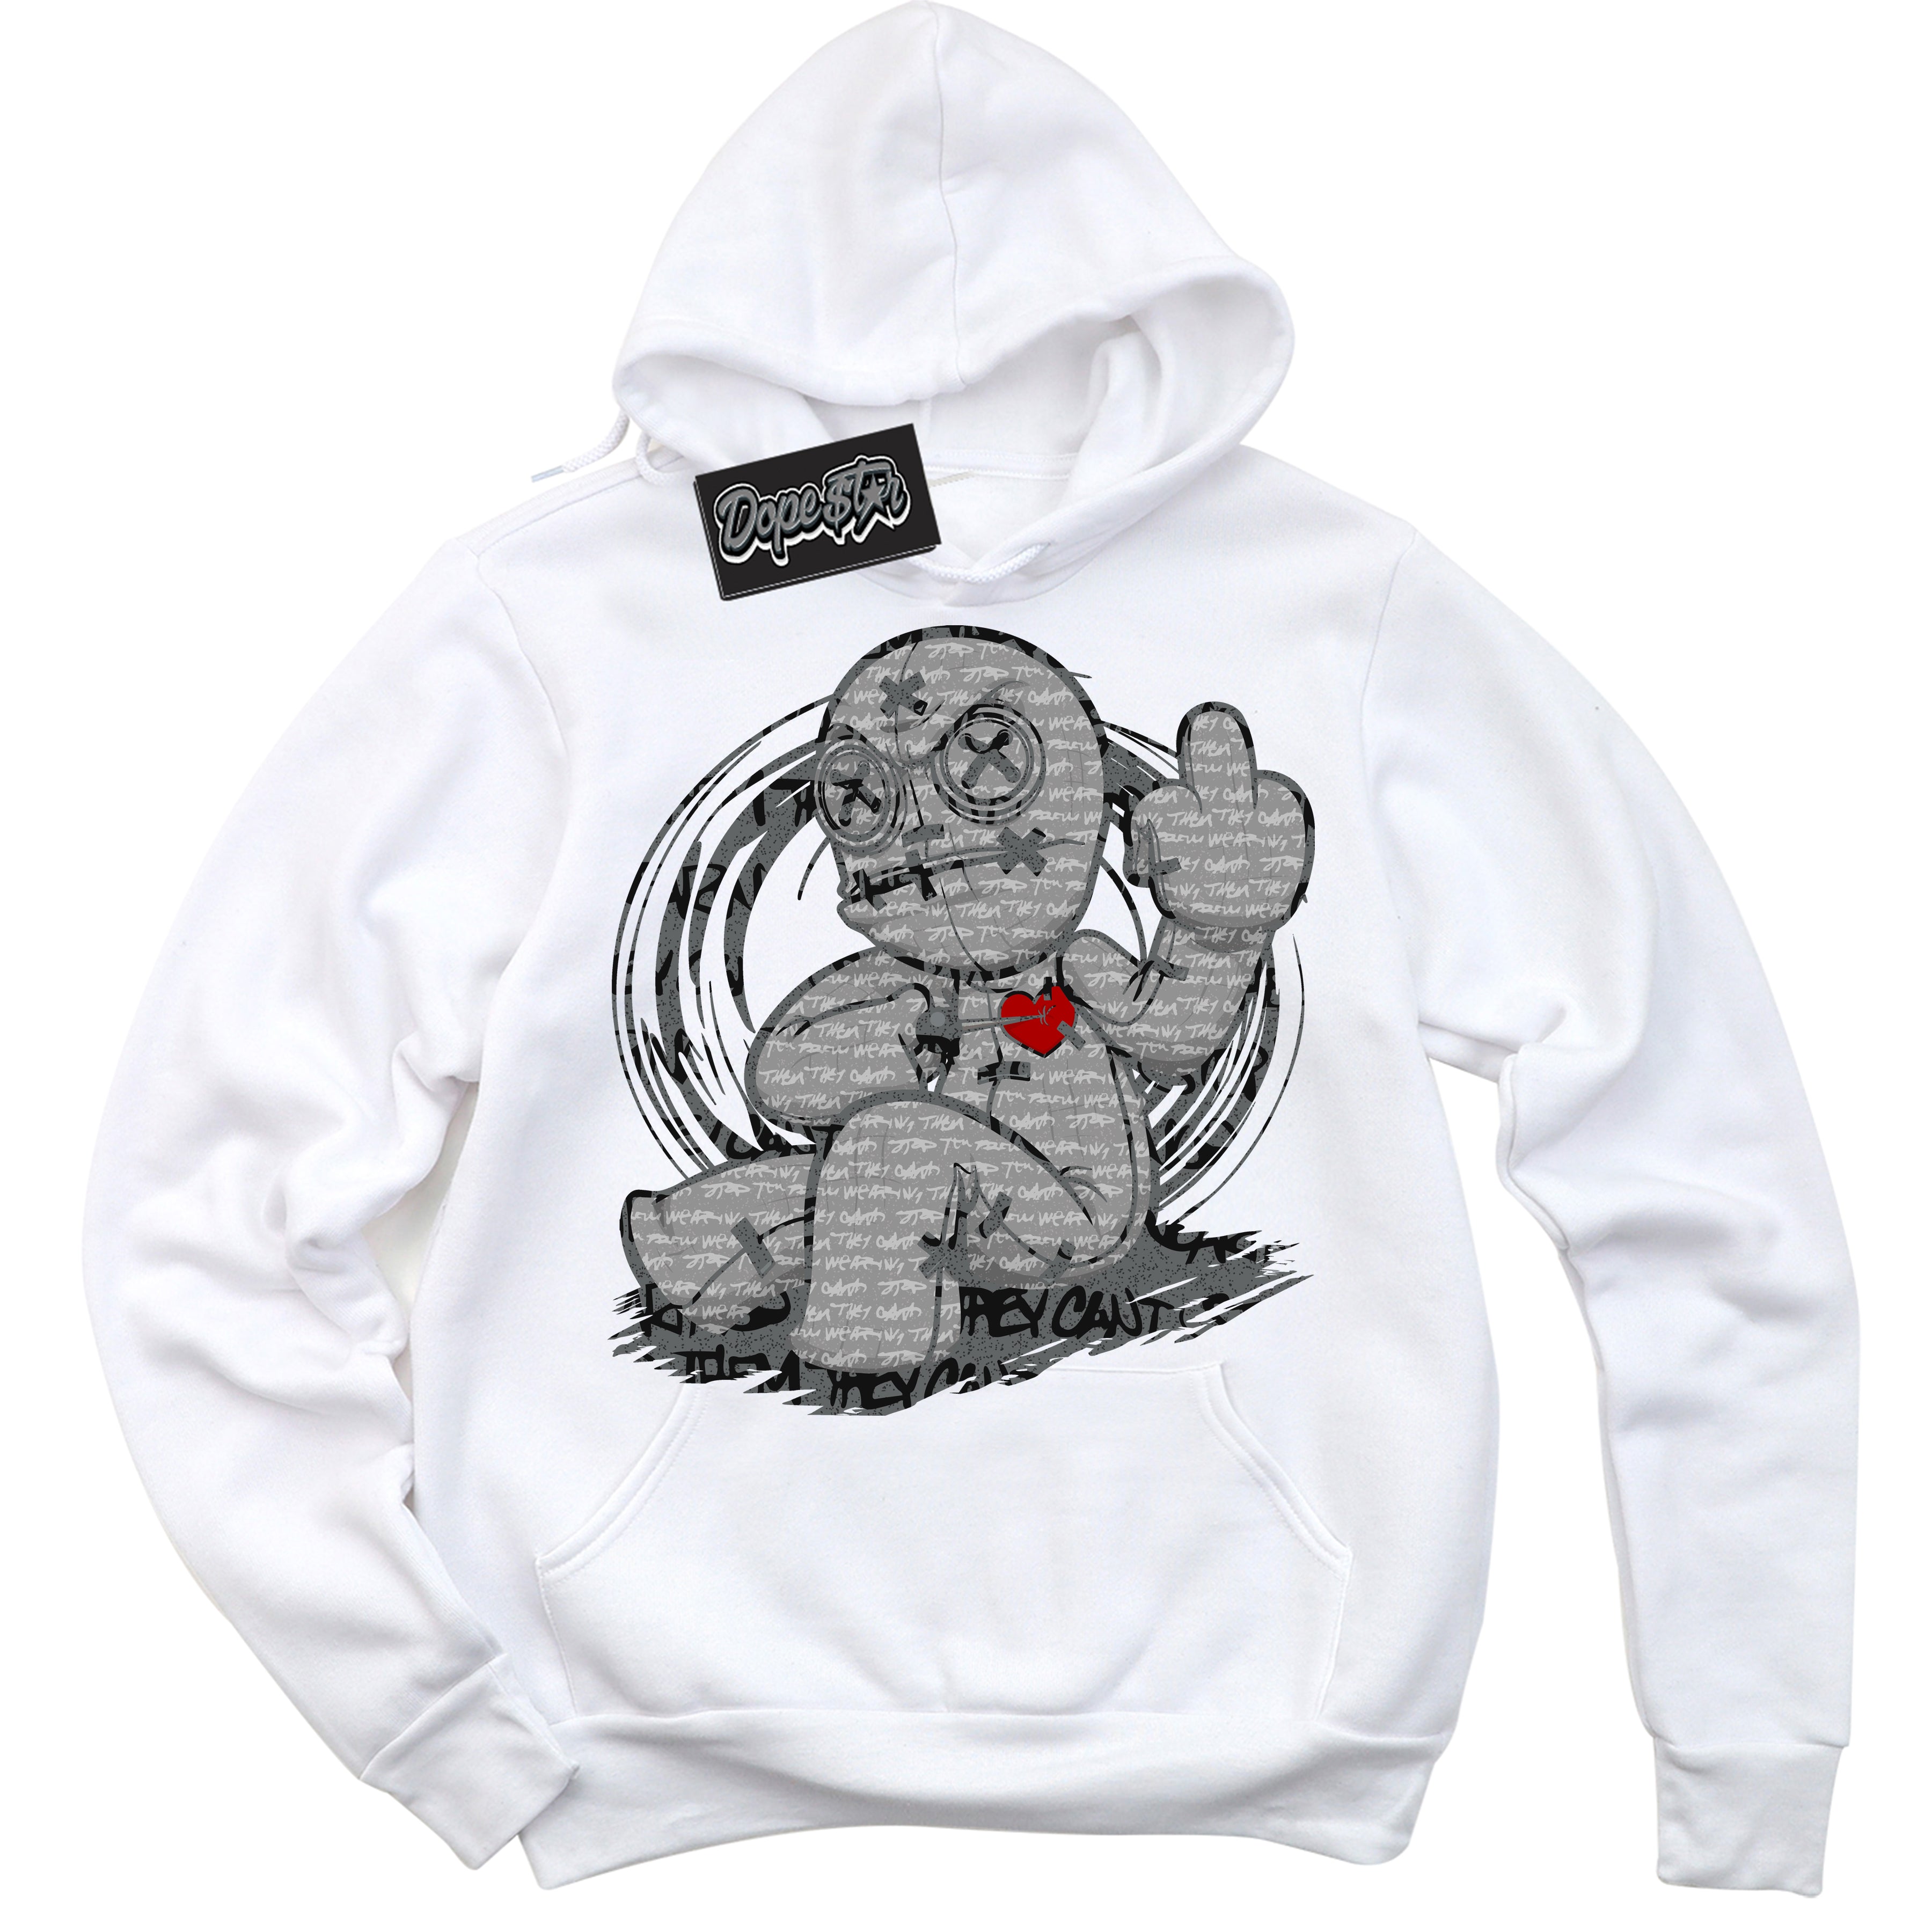 Cool White Hoodie with “ VooDoo Doll ”  design that Perfectly Matches Rebellionaire 1s Sneakers.